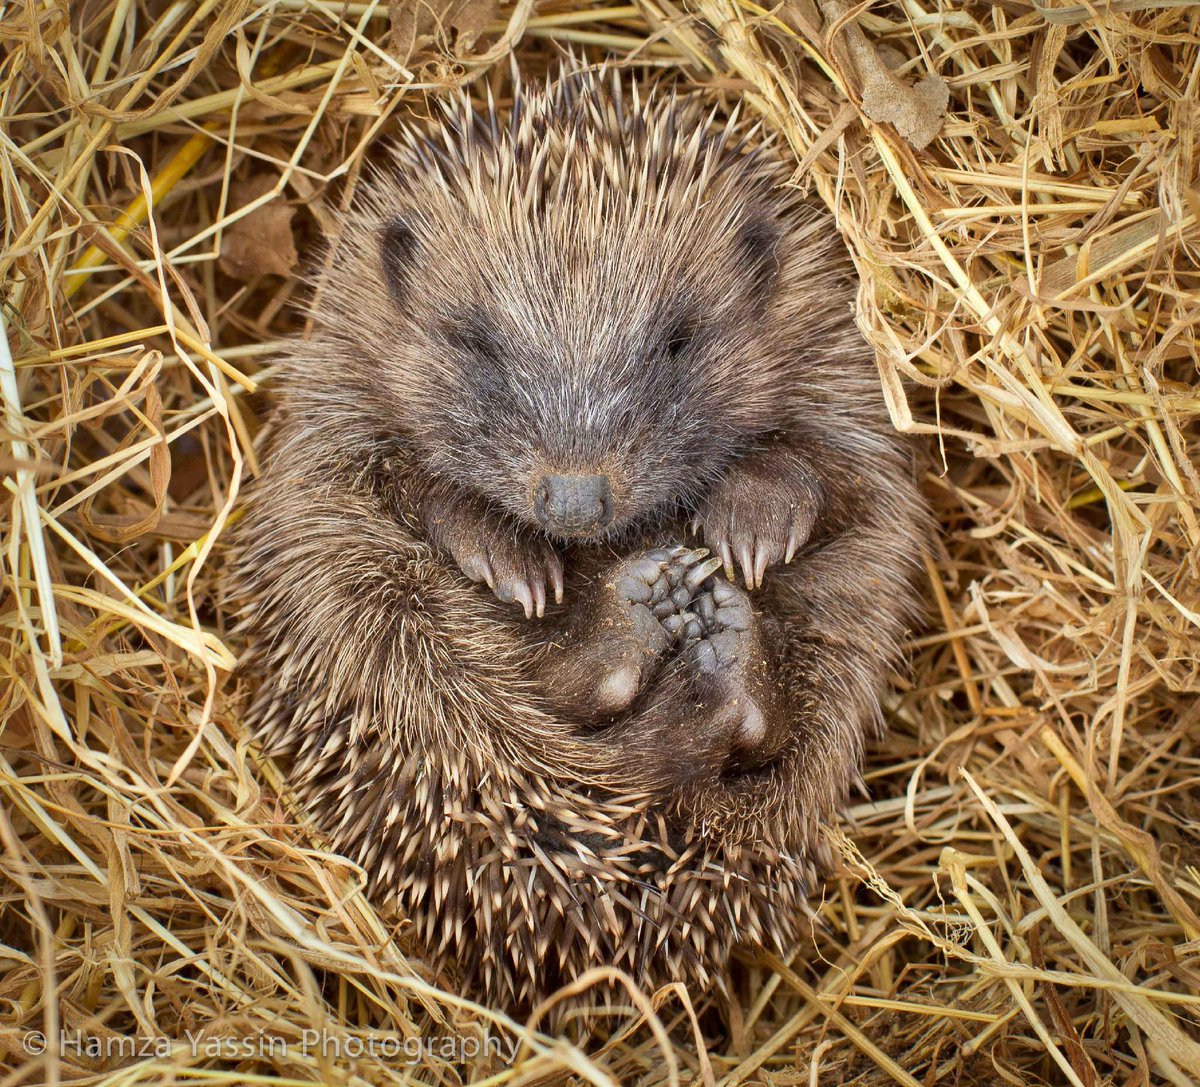 RT @HamzaYassin3: #Bonfire Night tomorrow, look out 4 our #Hedgehogs! Replaces logpile be4 burning @wildlife_uk